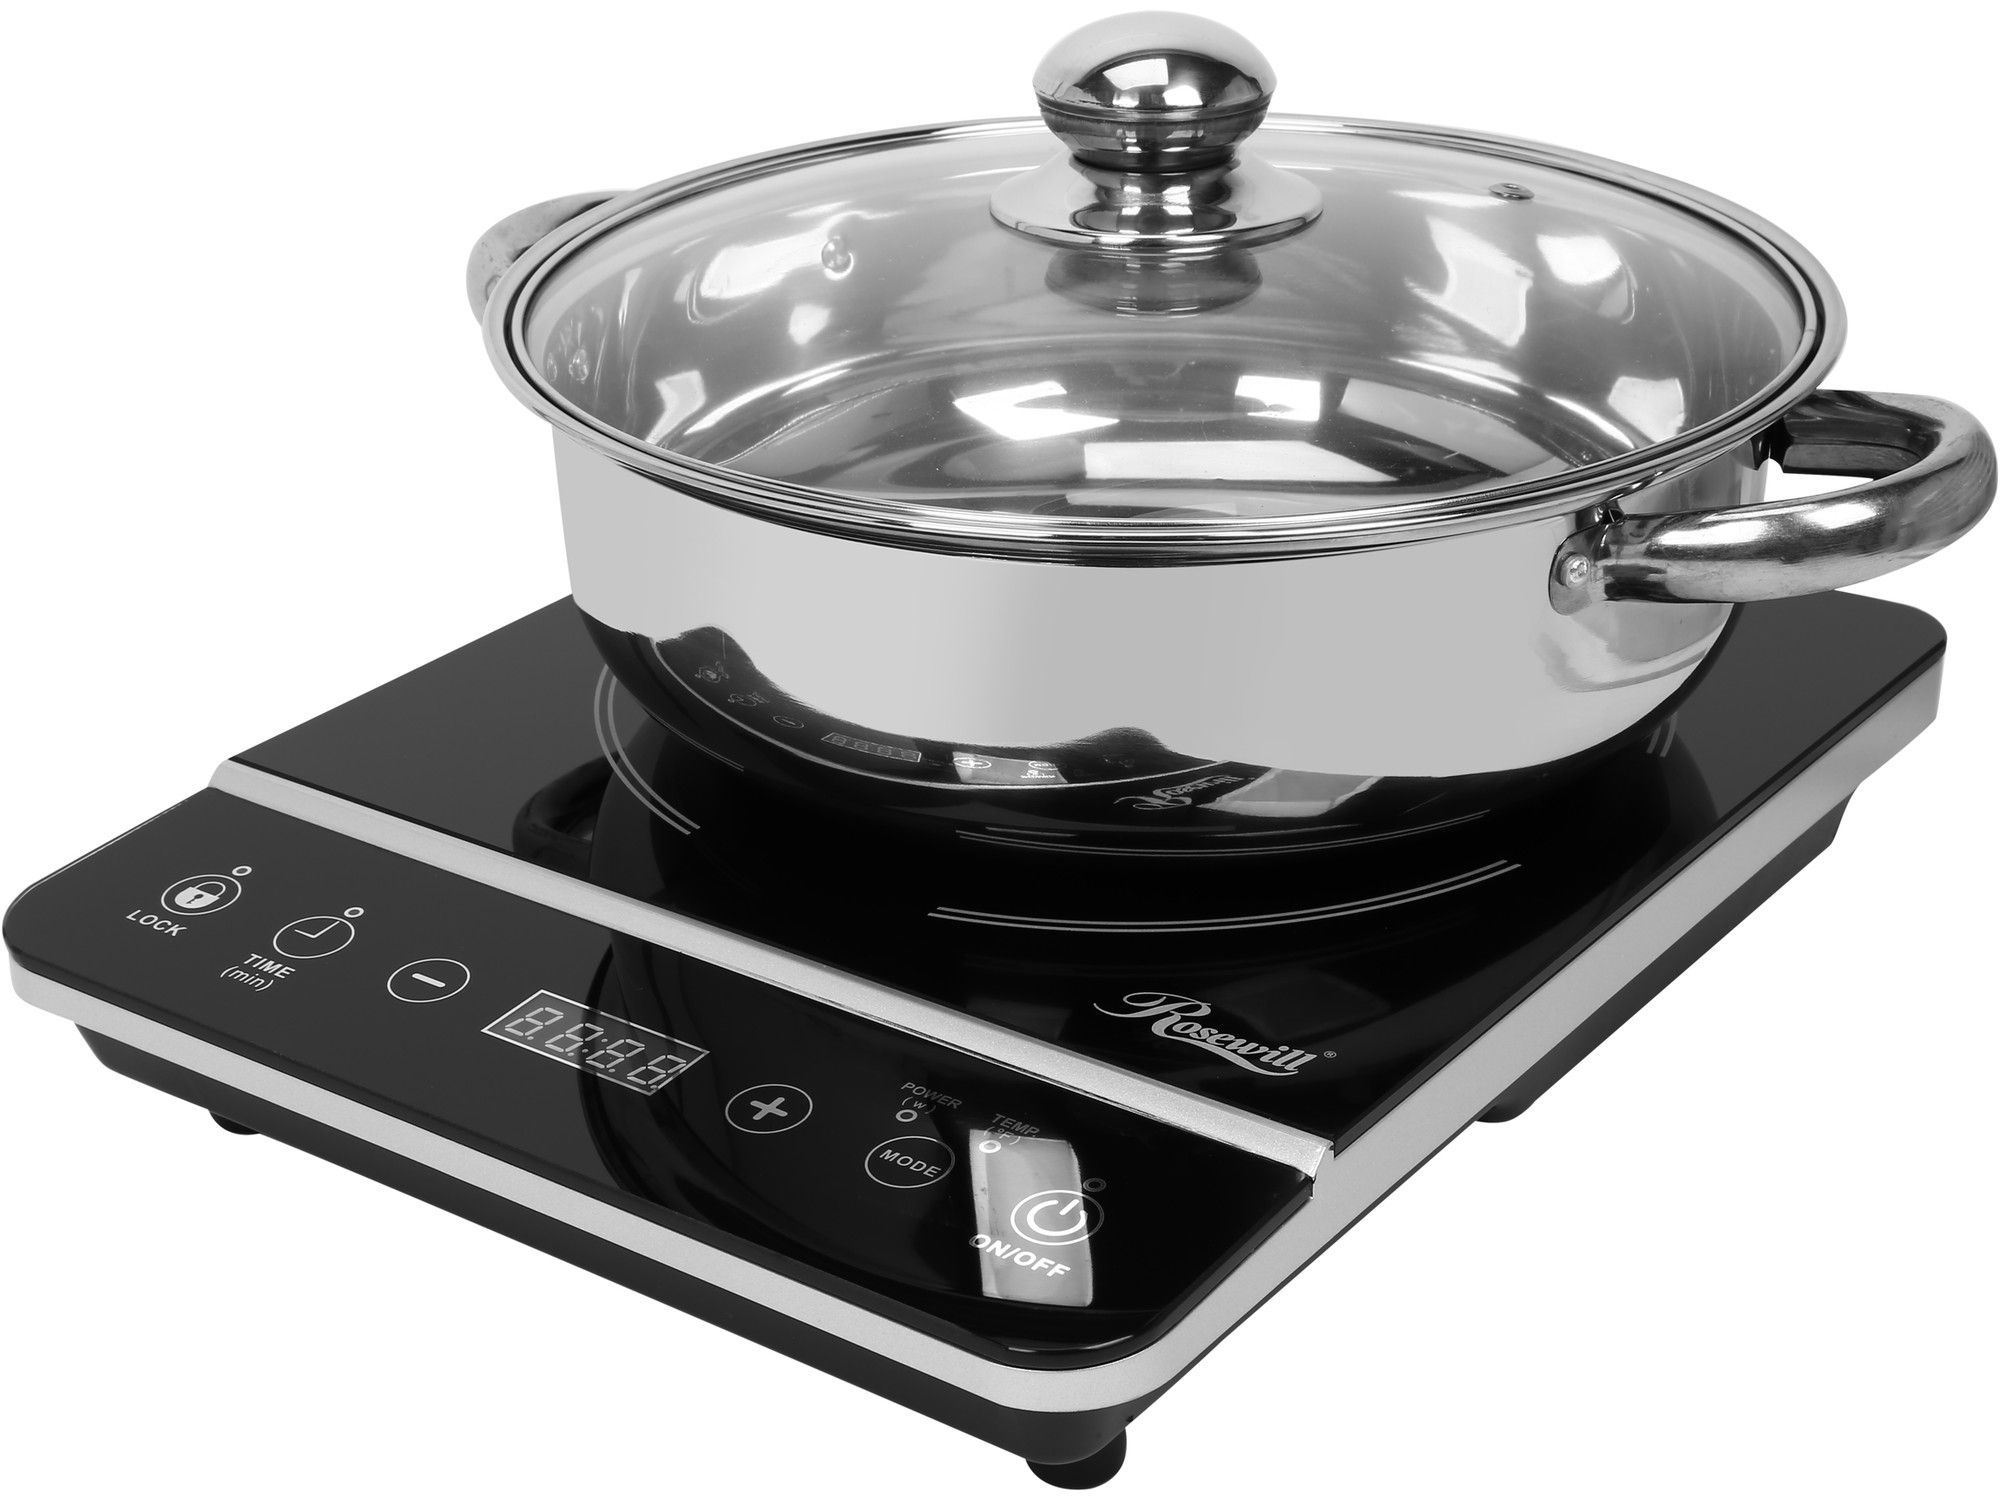 Hot Plate Cooker Price